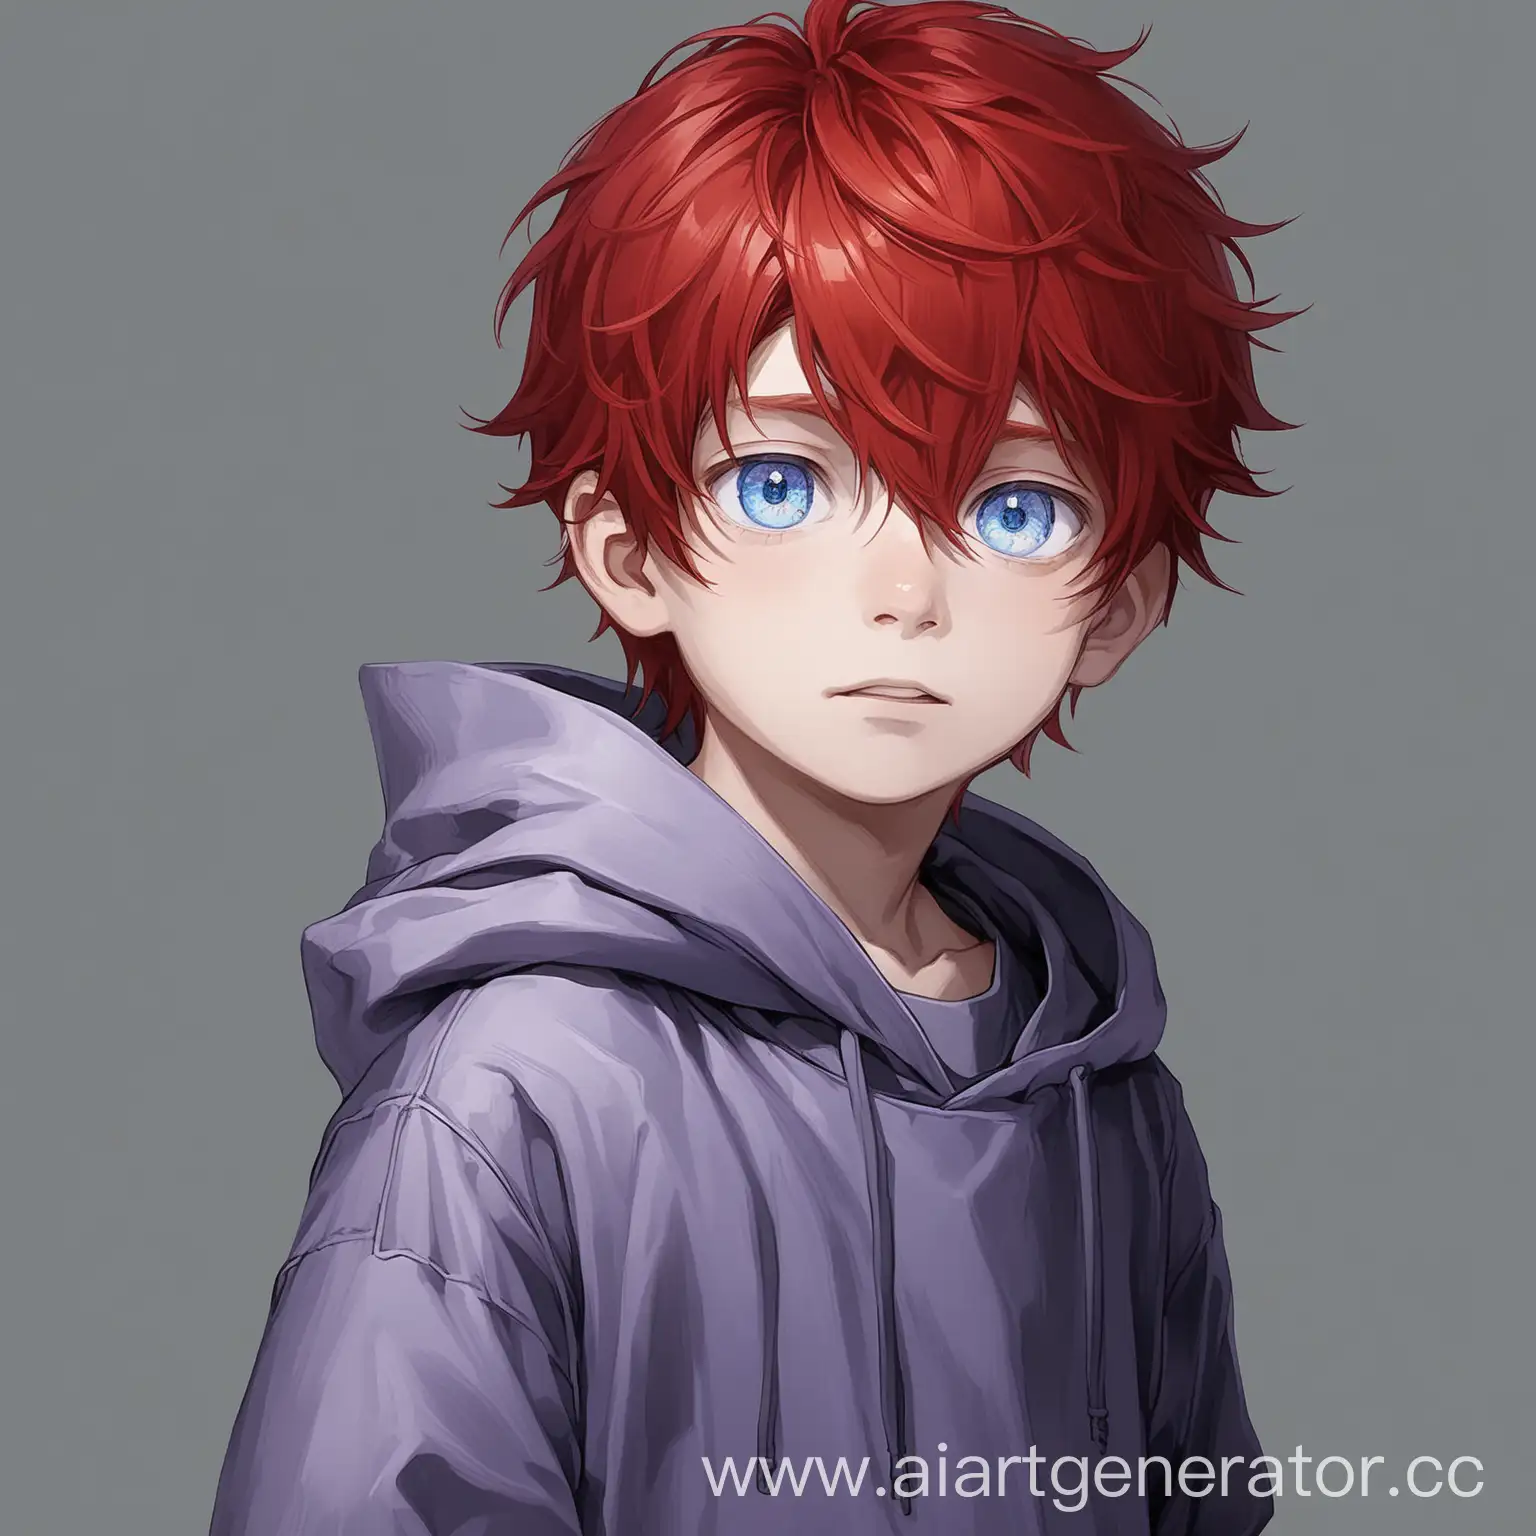 Boy-with-Red-Hair-and-Blue-Eyes-in-PurpleGrey-Clothing